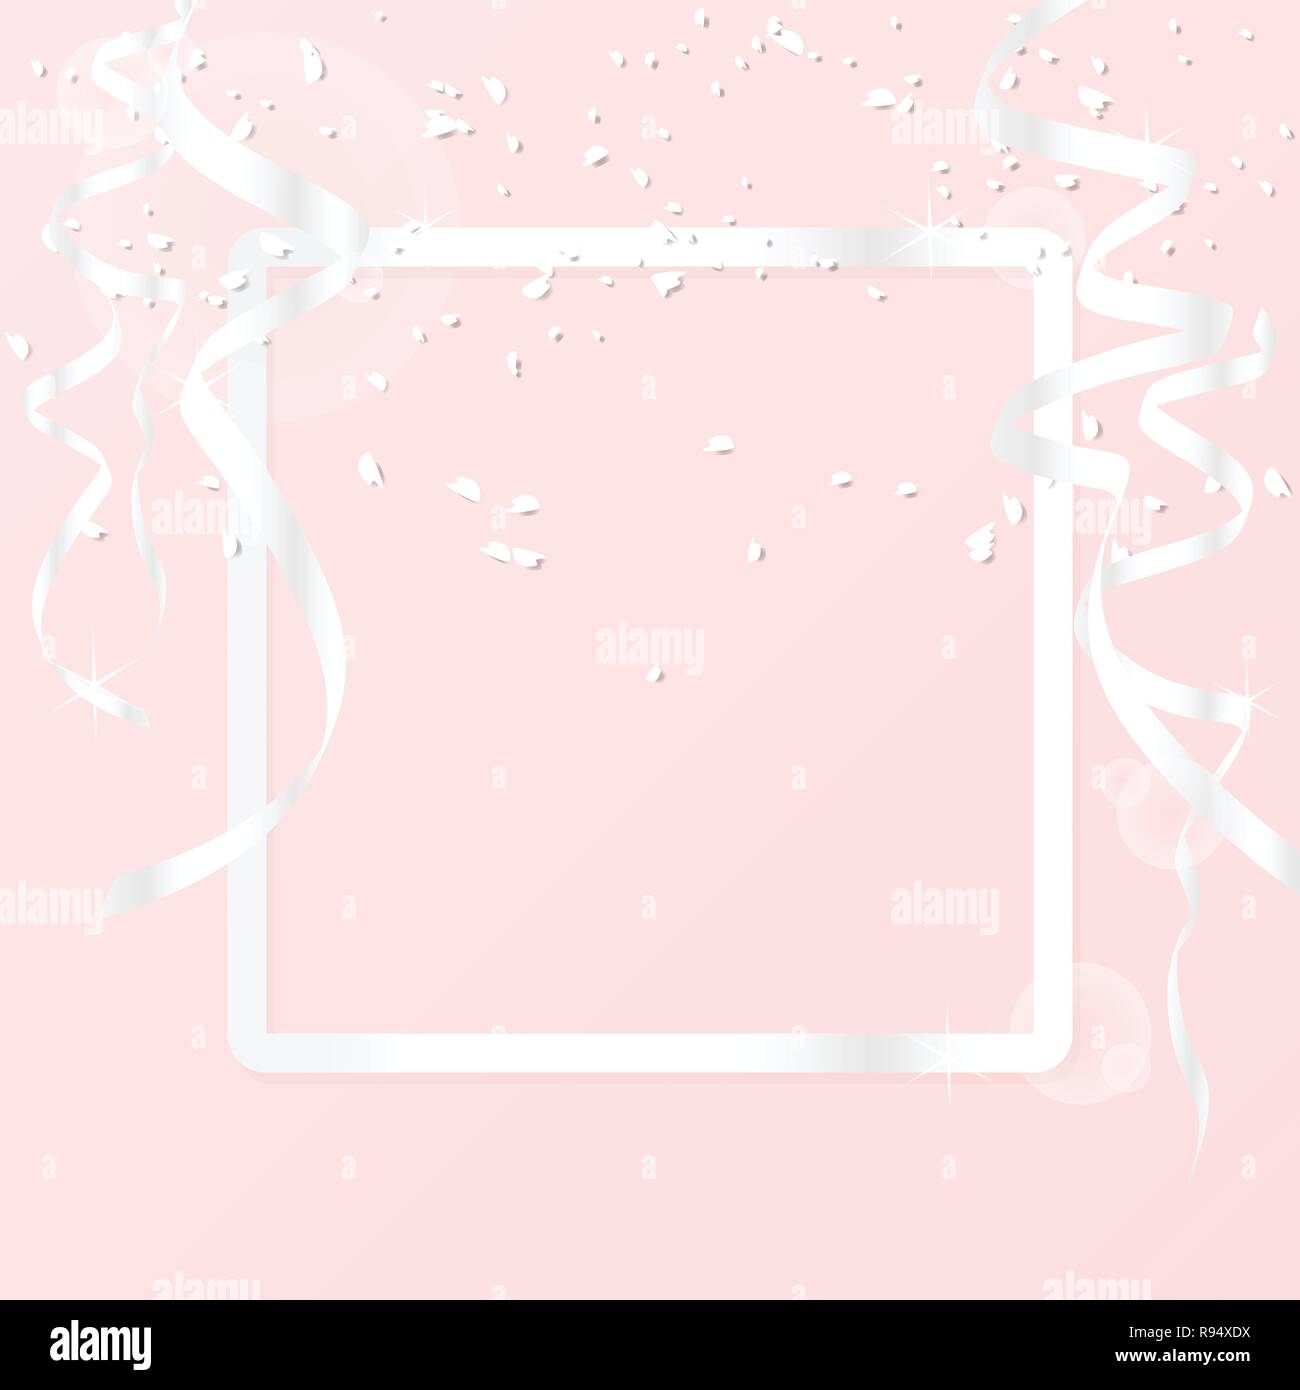 greeting card background with luxury silver border frame and decoration with silver ribbon and glitter isolated on pink background. vector illustratio Stock Vector